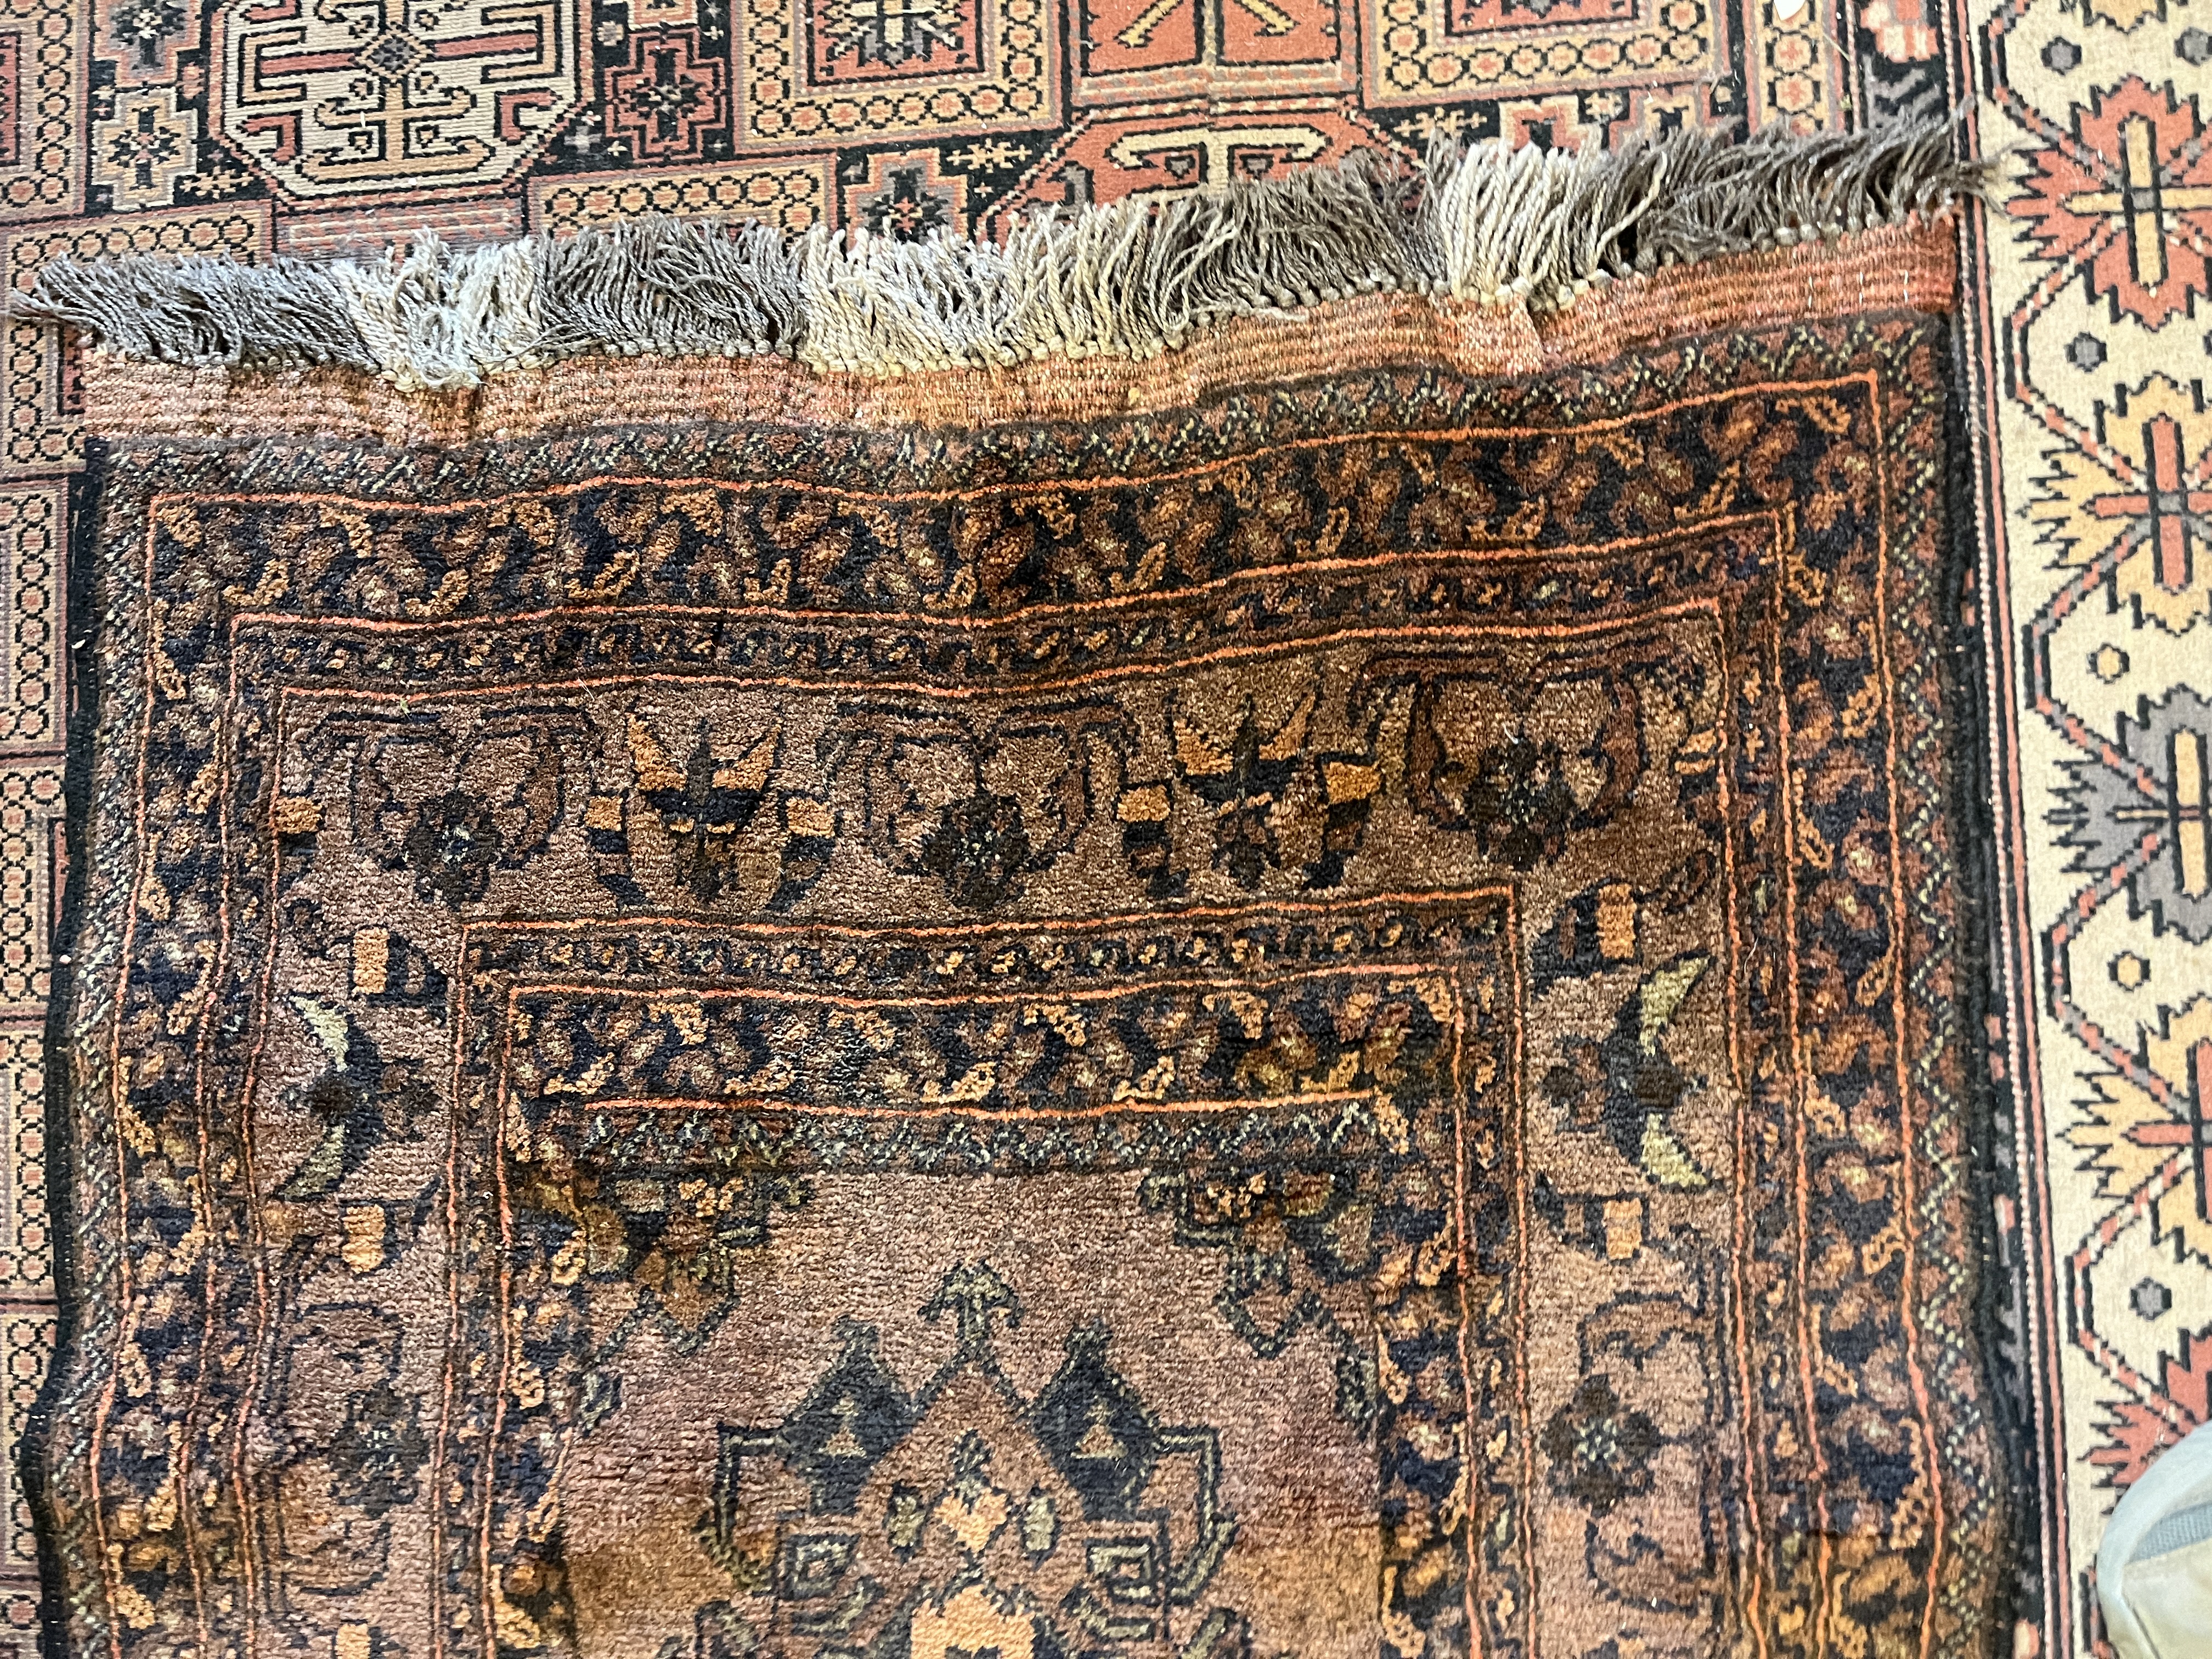 Vintage Persian nomad wool hand woven rug - Approx size: 137cm x 76cm - Image 2 of 3